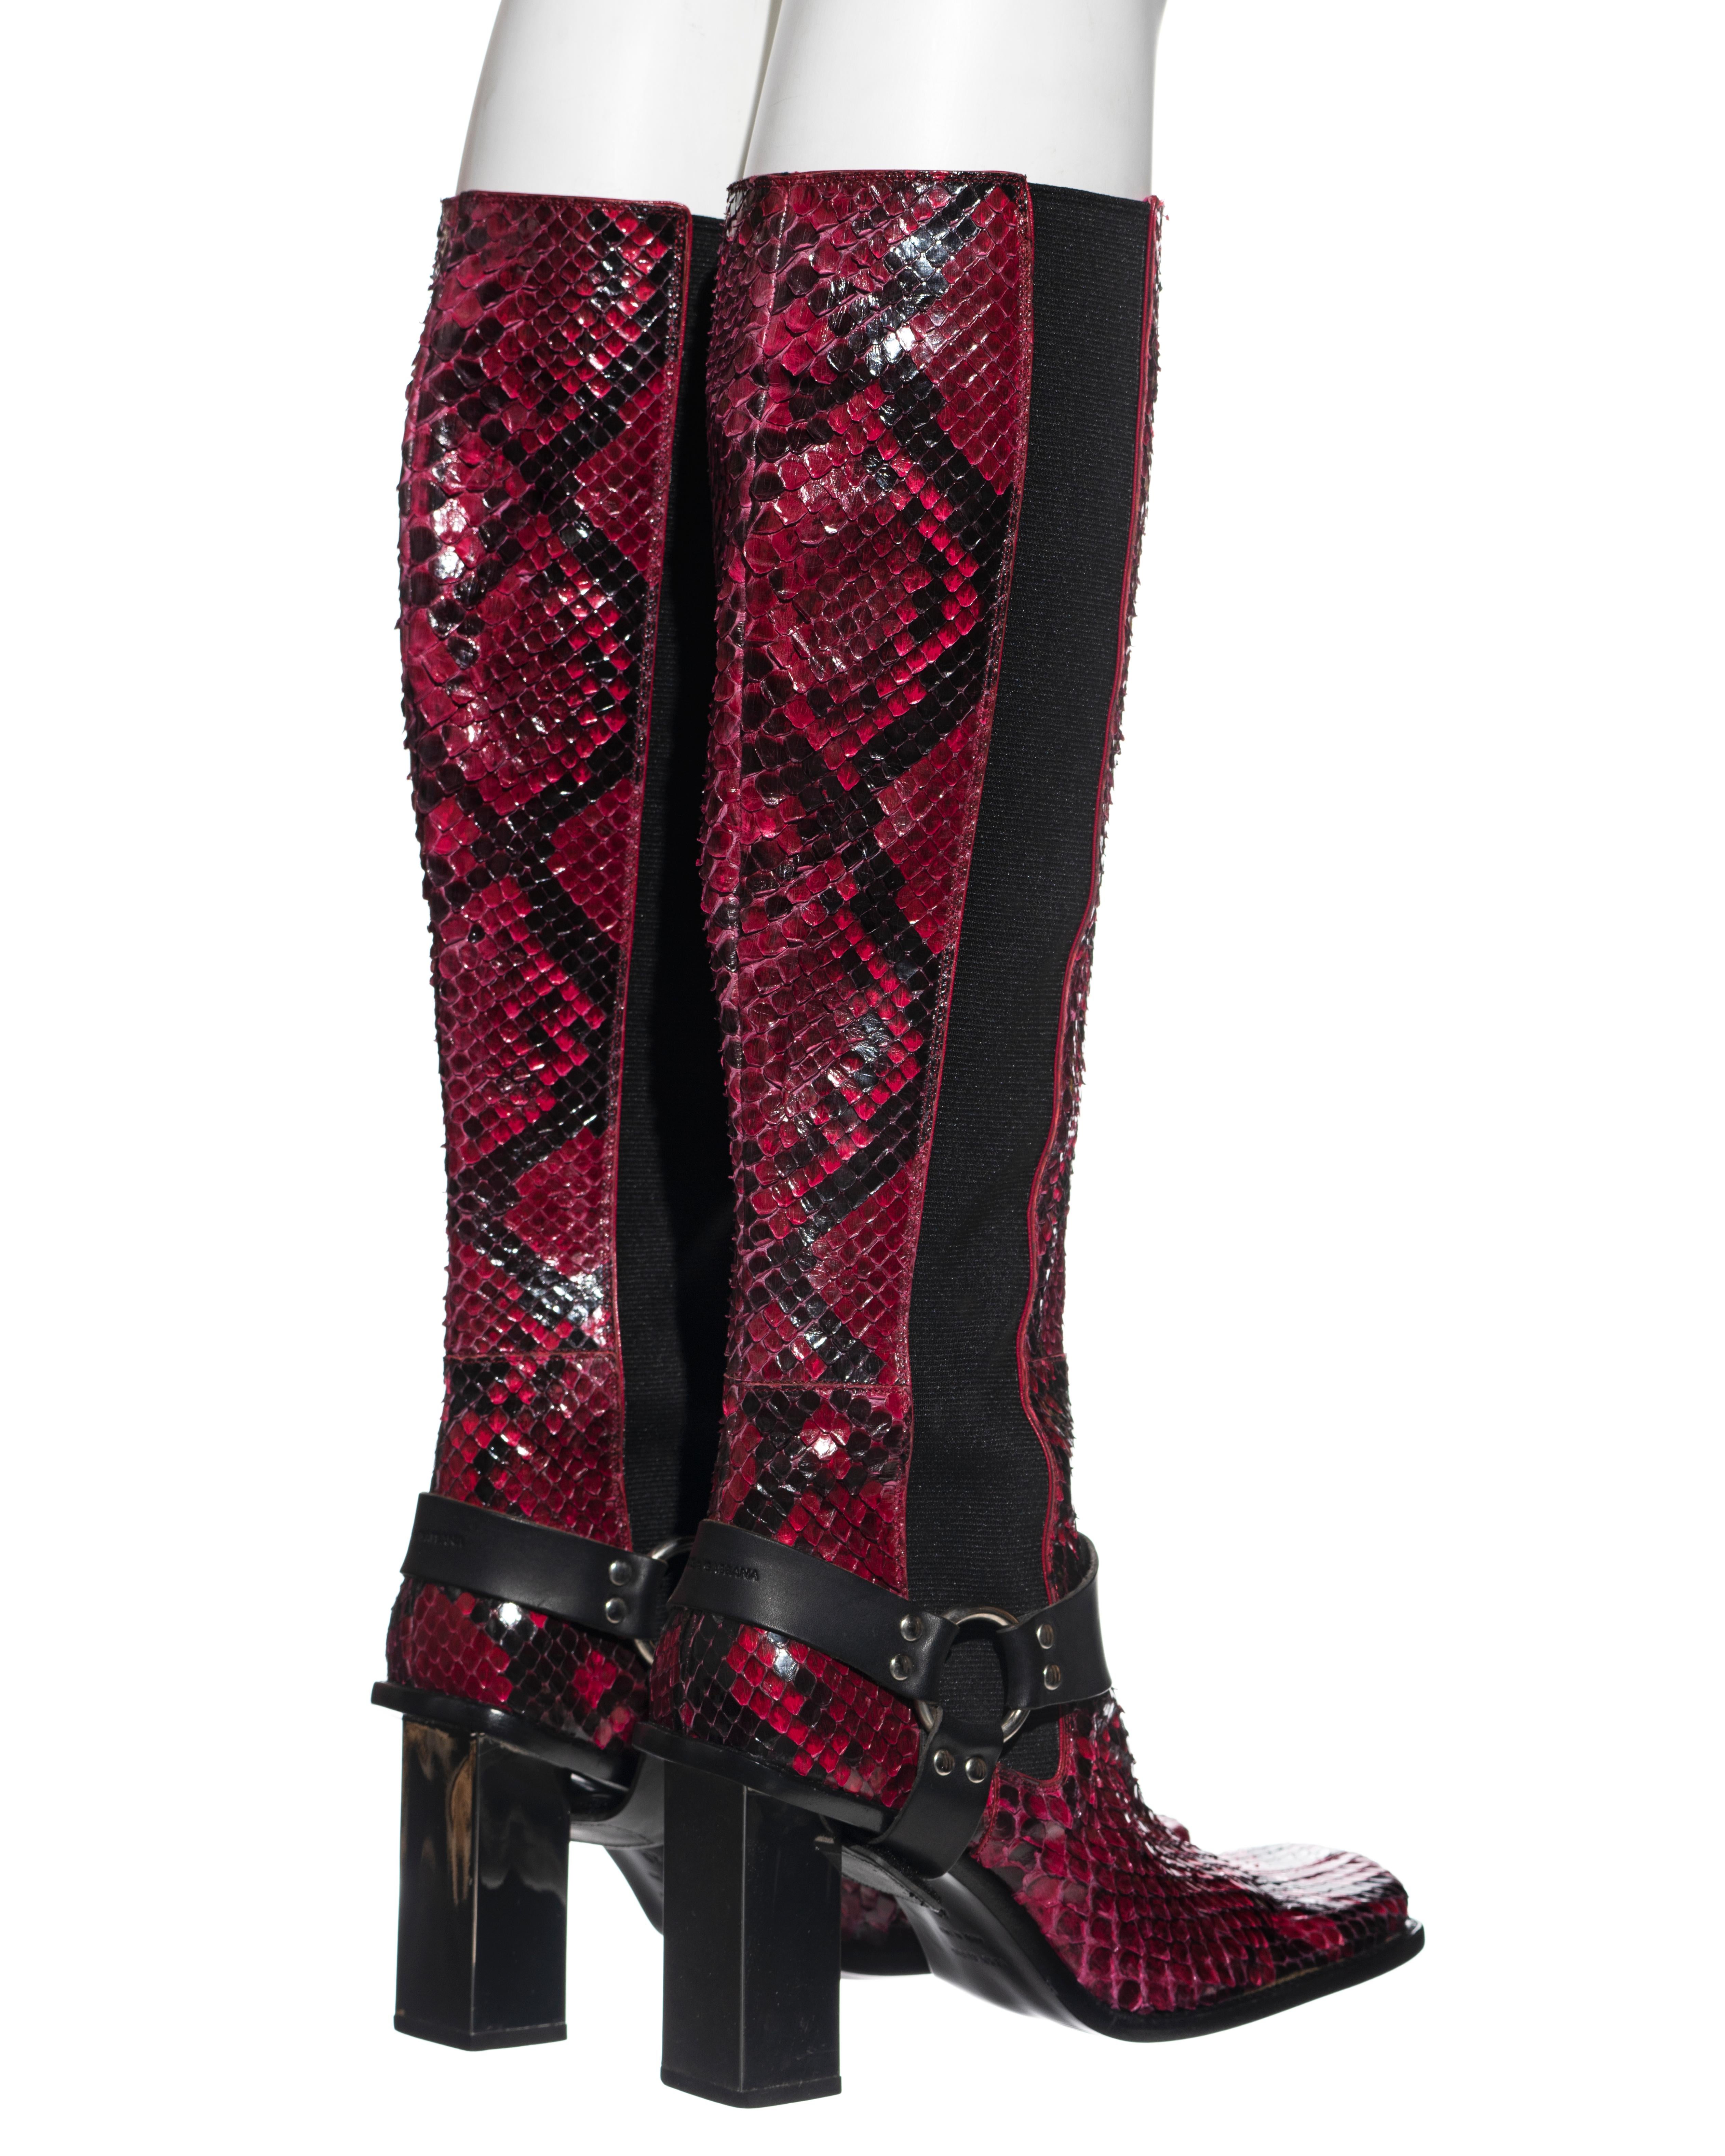 Dolce & Gabbana raspberry python boots with mirrored heels, fw 1999 For Sale 3